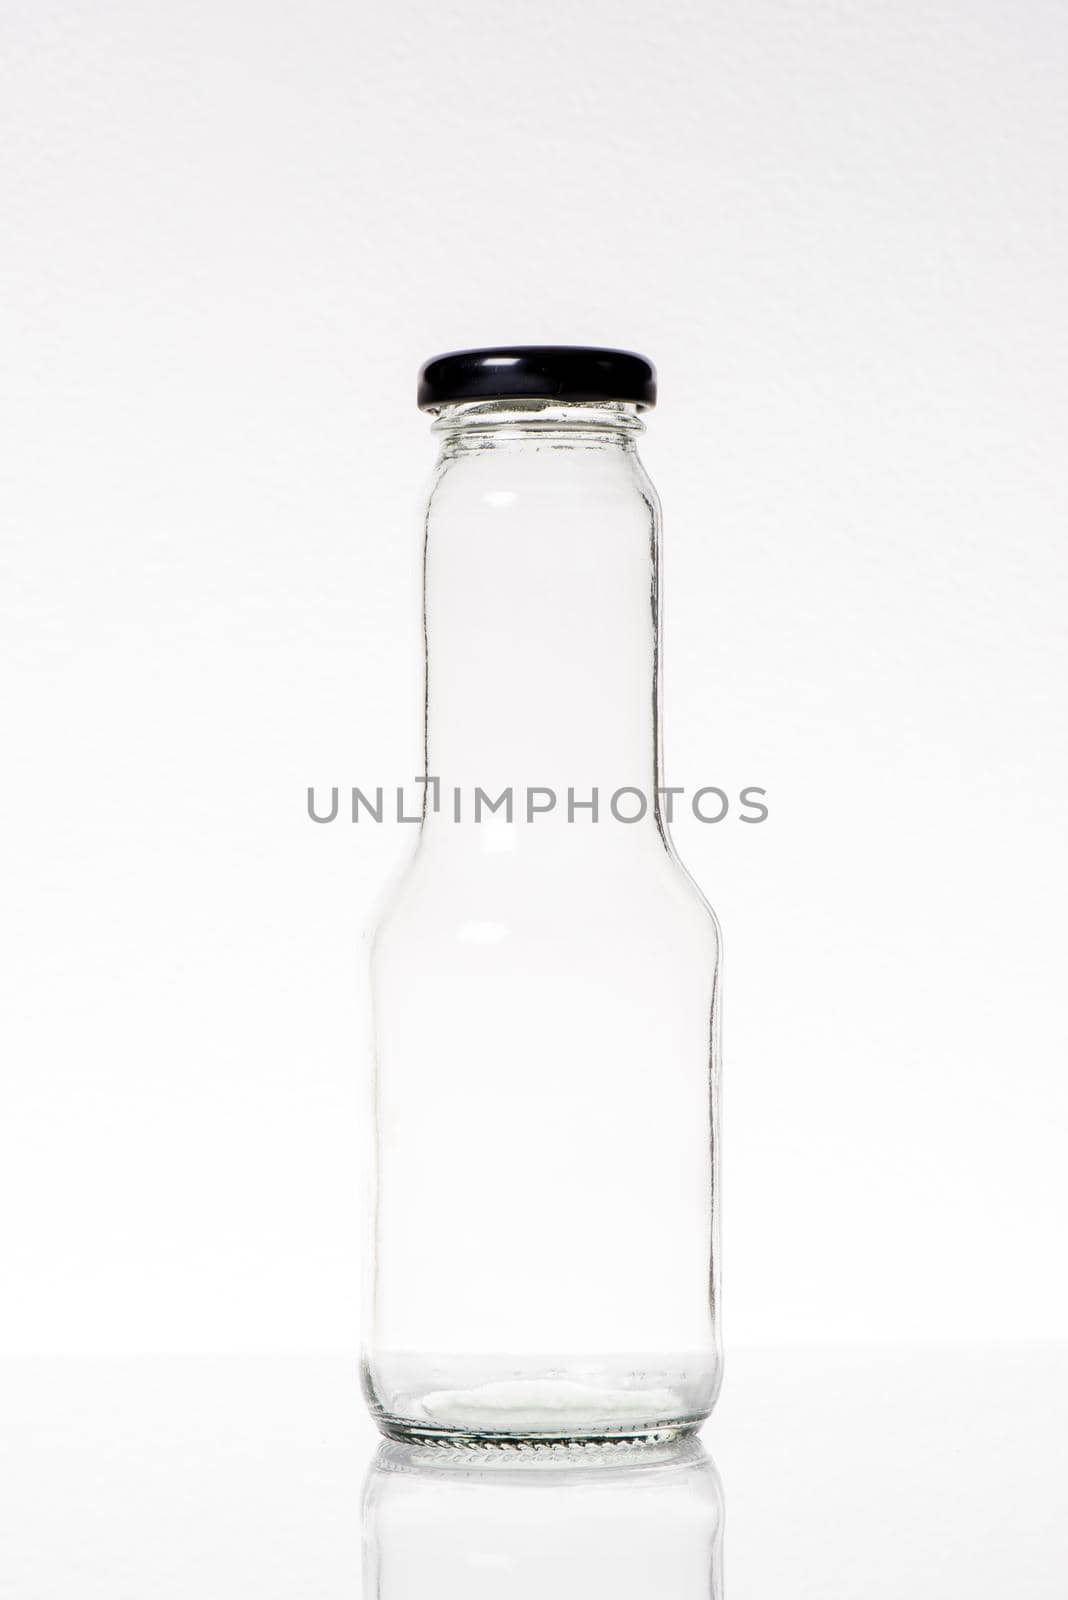 clear glass bottle isolated on white background